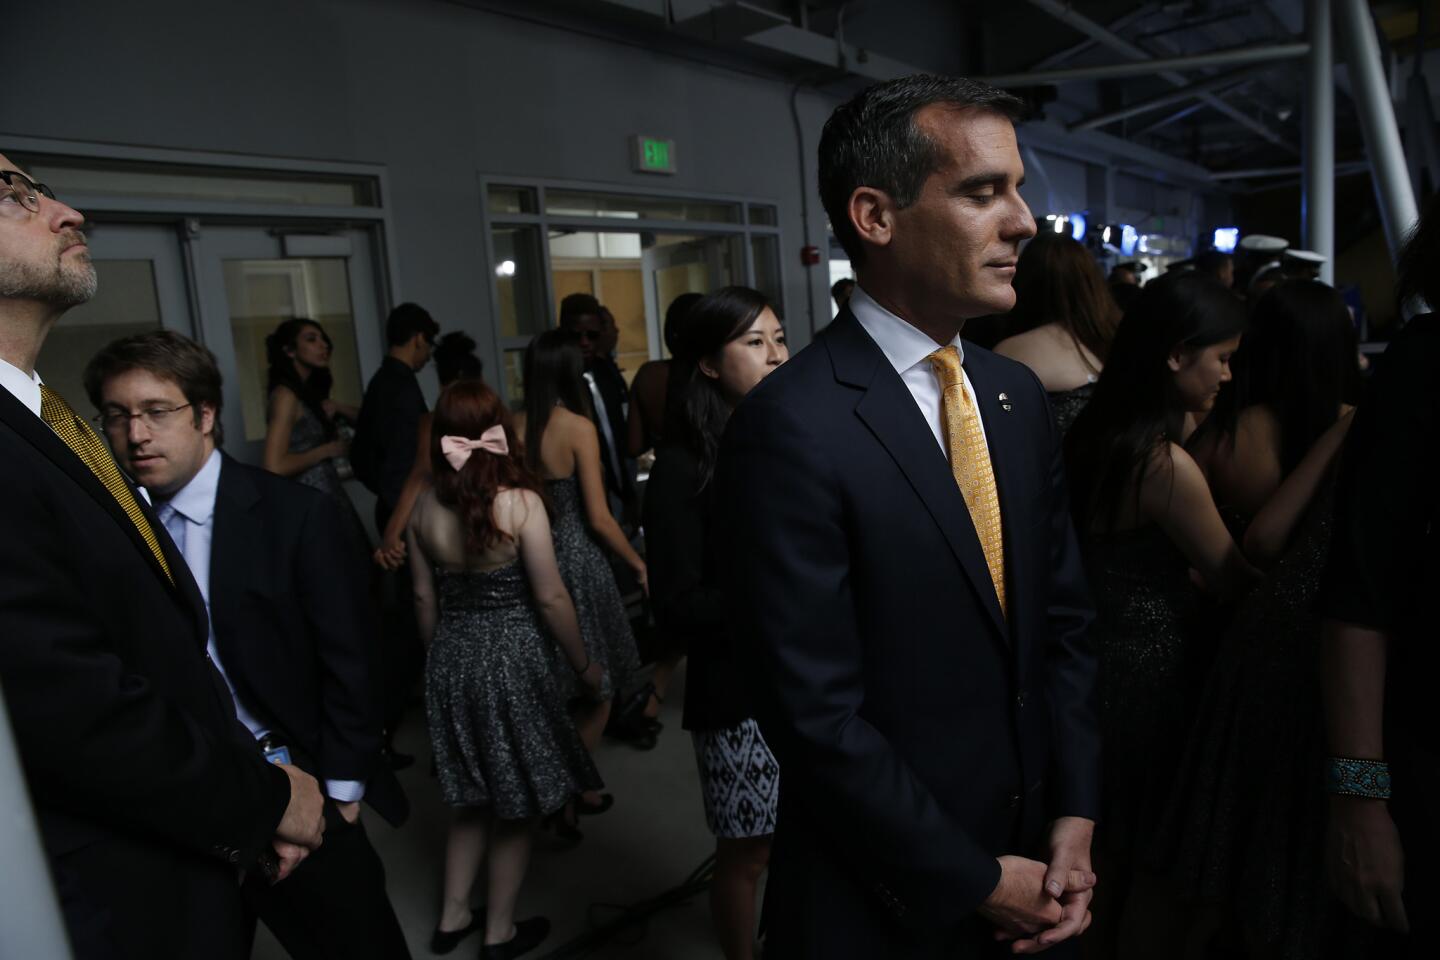 Mayor Eric Garcetti pauses backstage moments before delivering his first State of the City address in the Wallis Annenberg Building at the California Science Center.